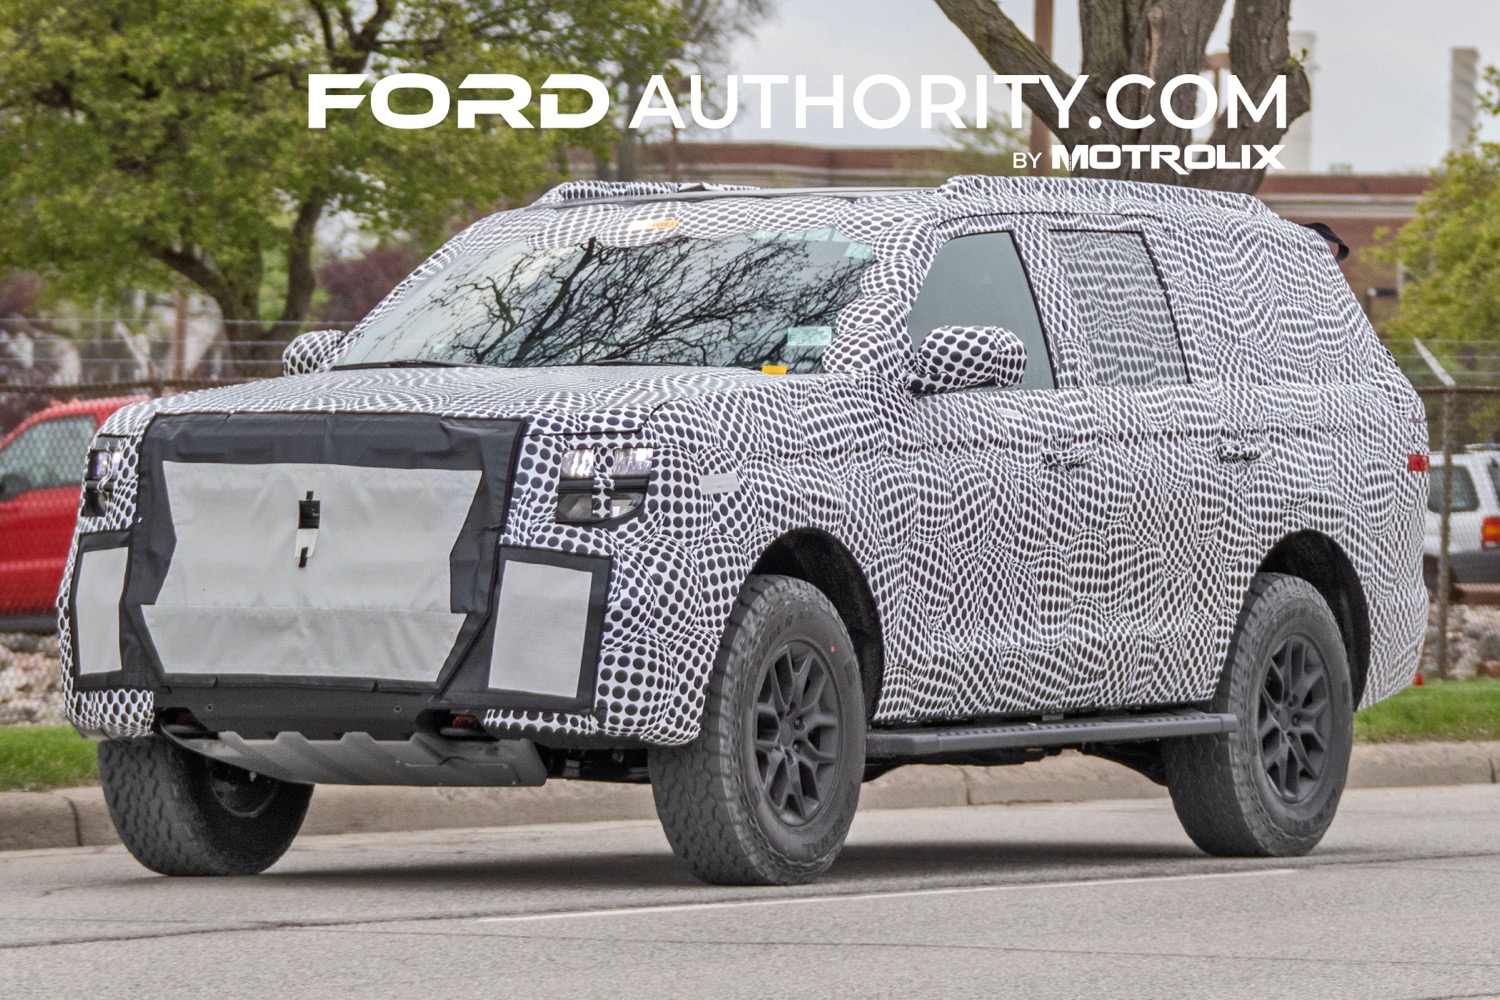 2025 Ford Expedition Spotted For First Time With Big Changes